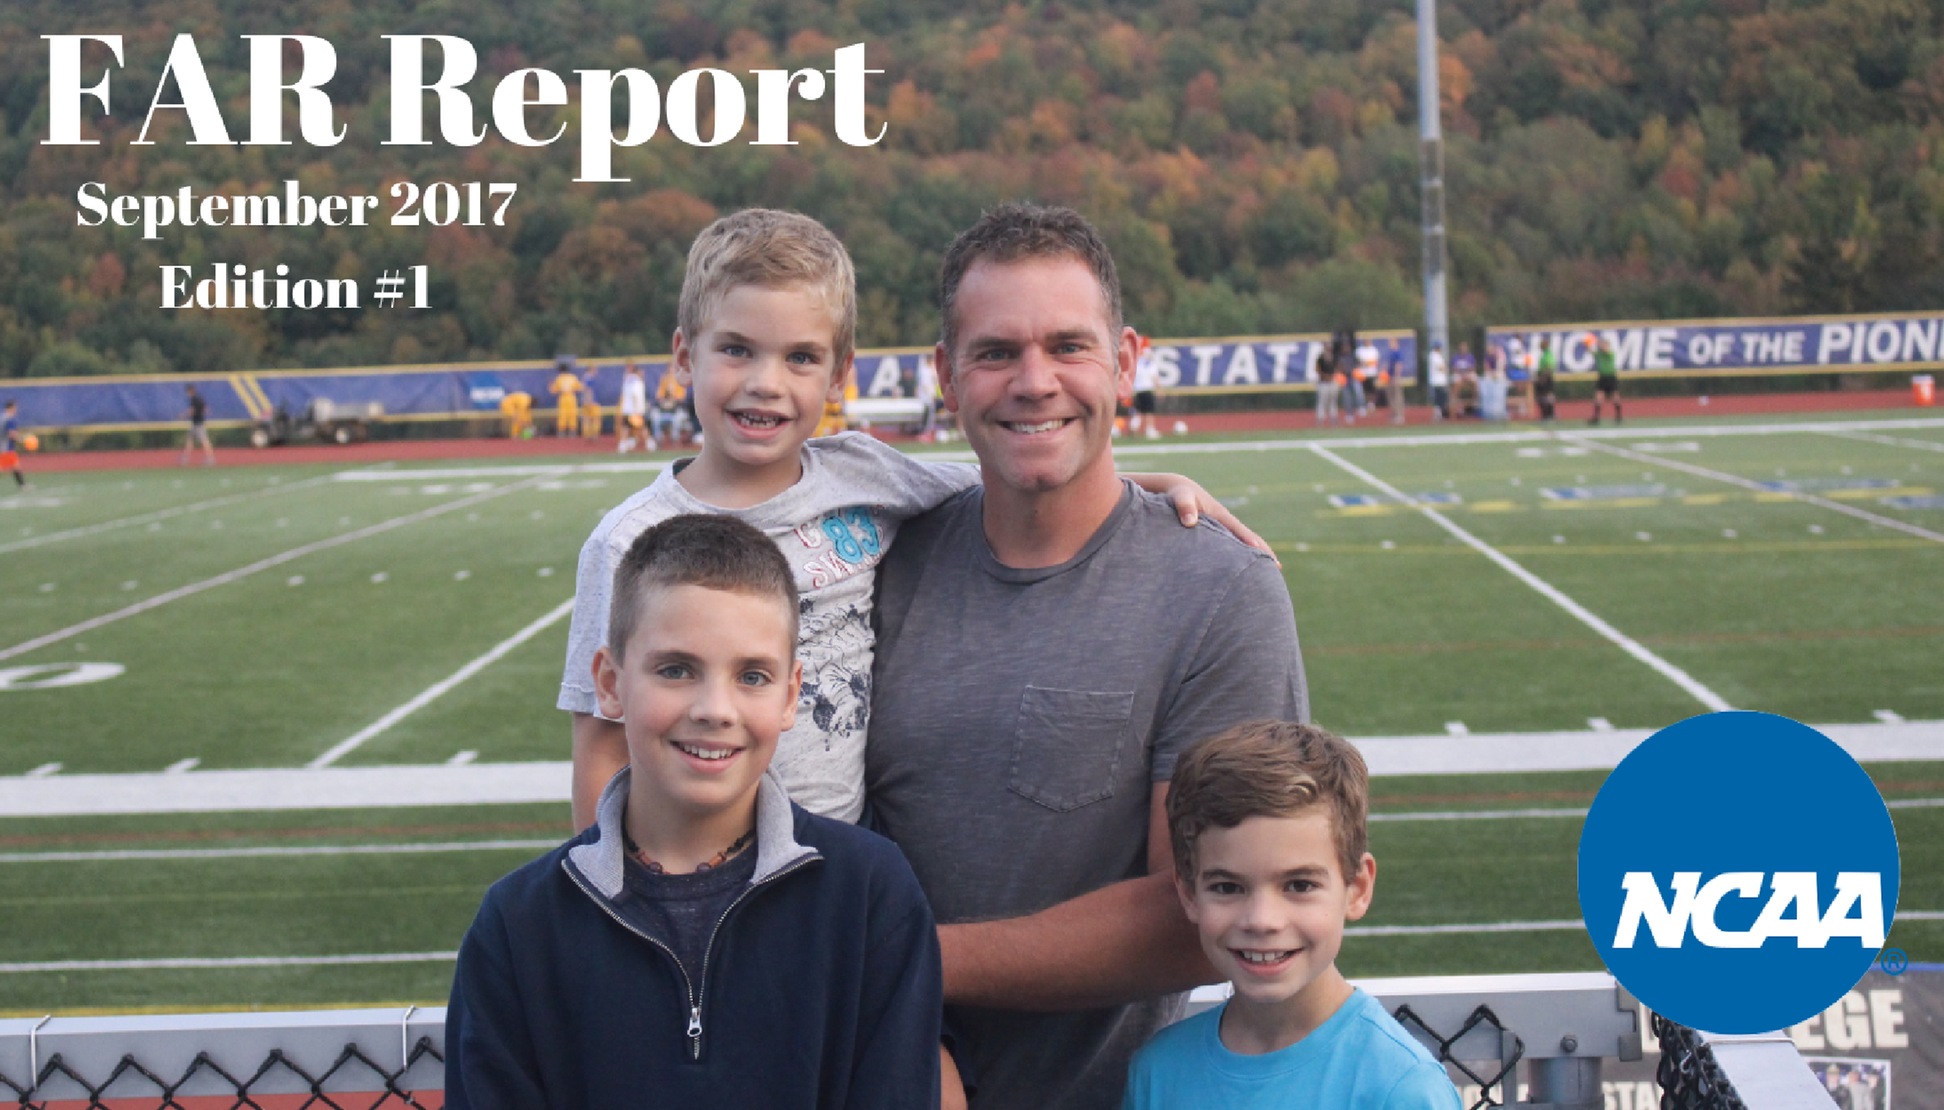 Faculty Athletic Rep Report